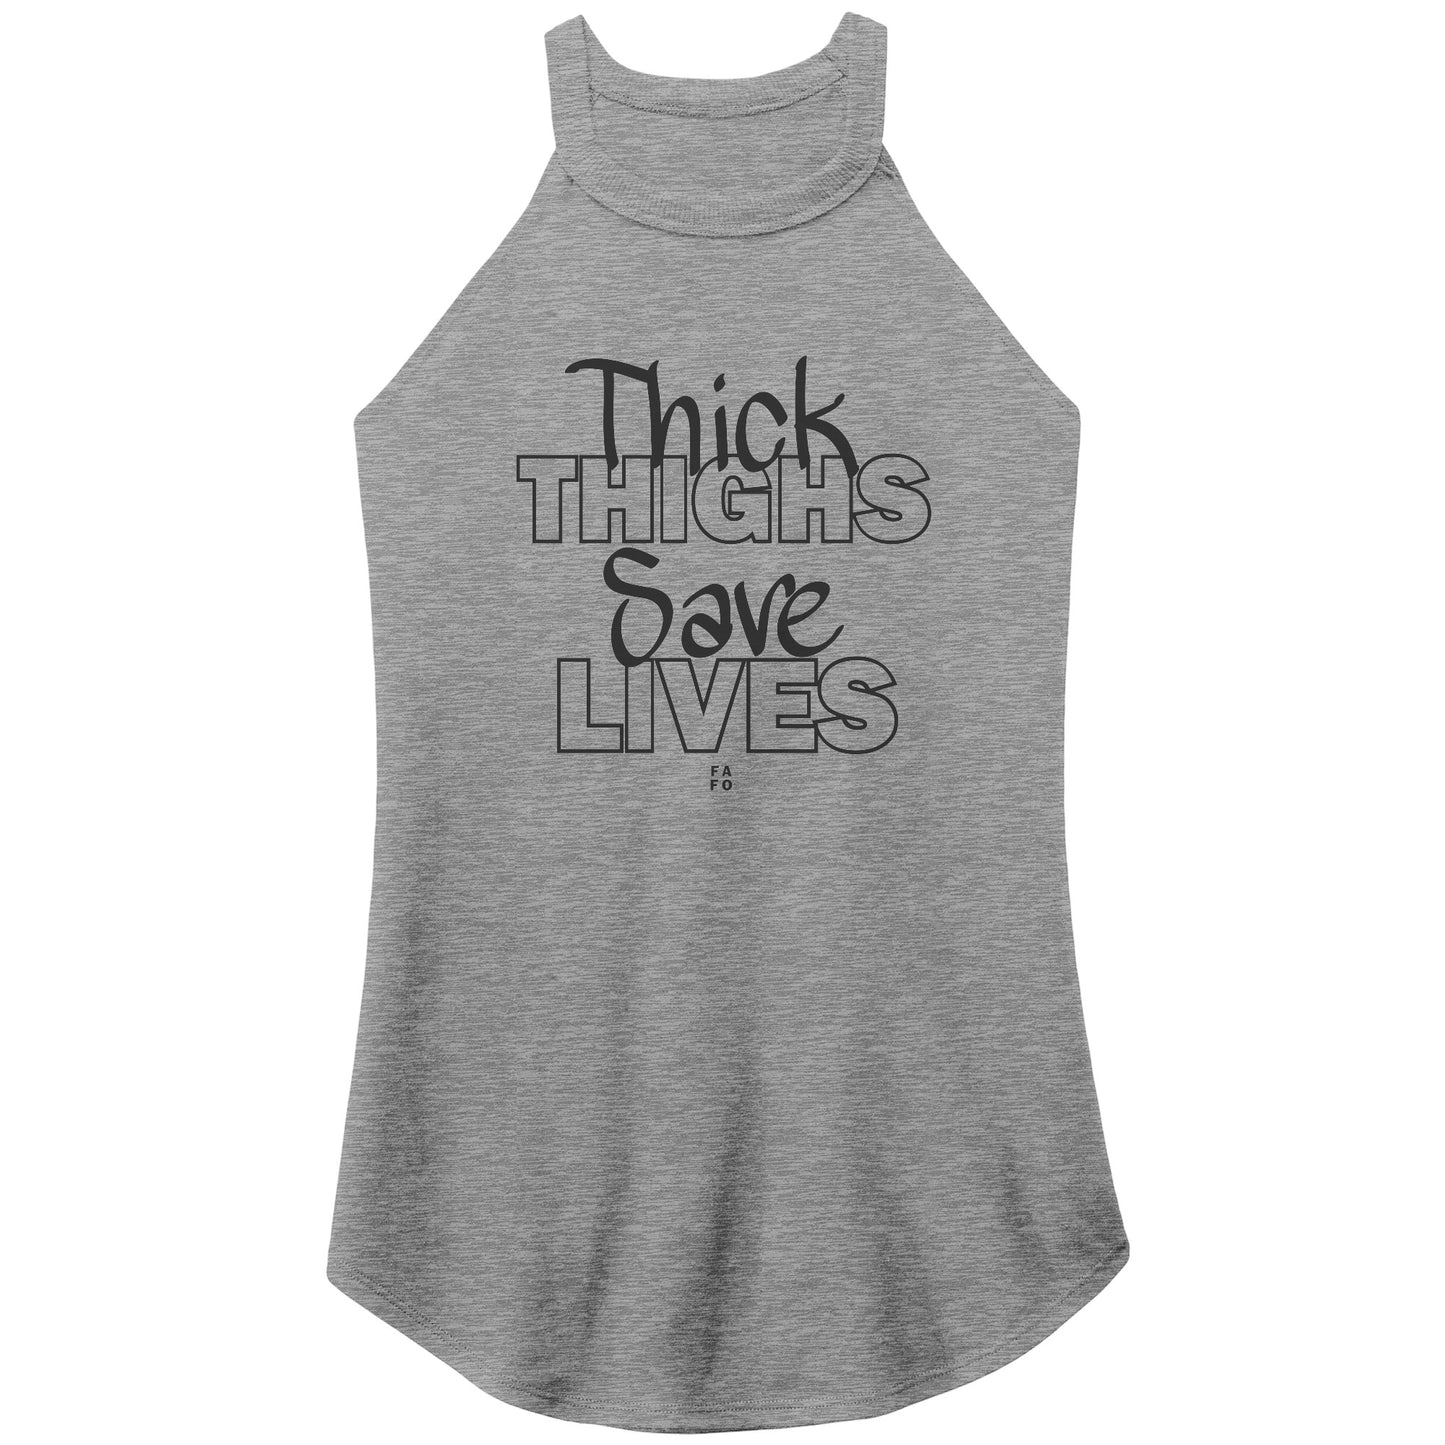 Rocker Tank - Thick Thighs Save Lives - FAFO Sportswear